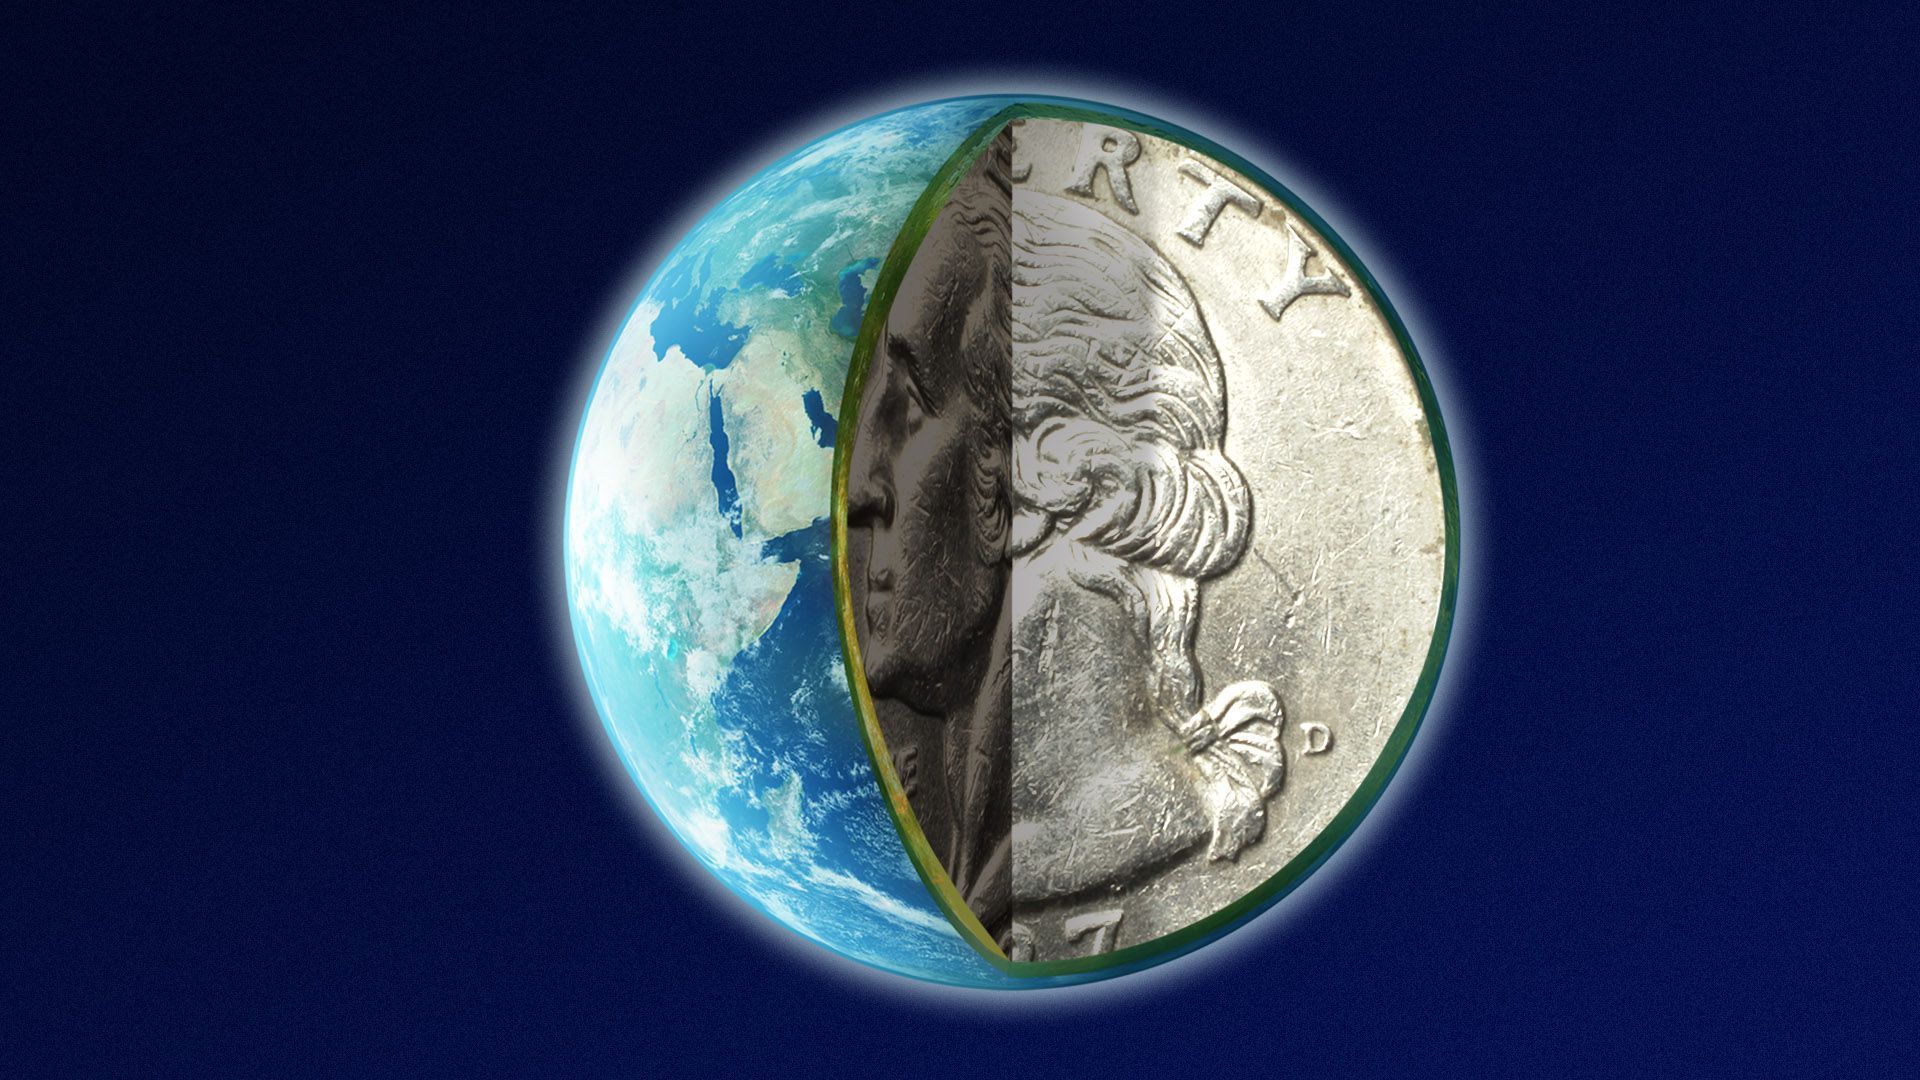 Illustration of a cross section of the earth with a quarter inside